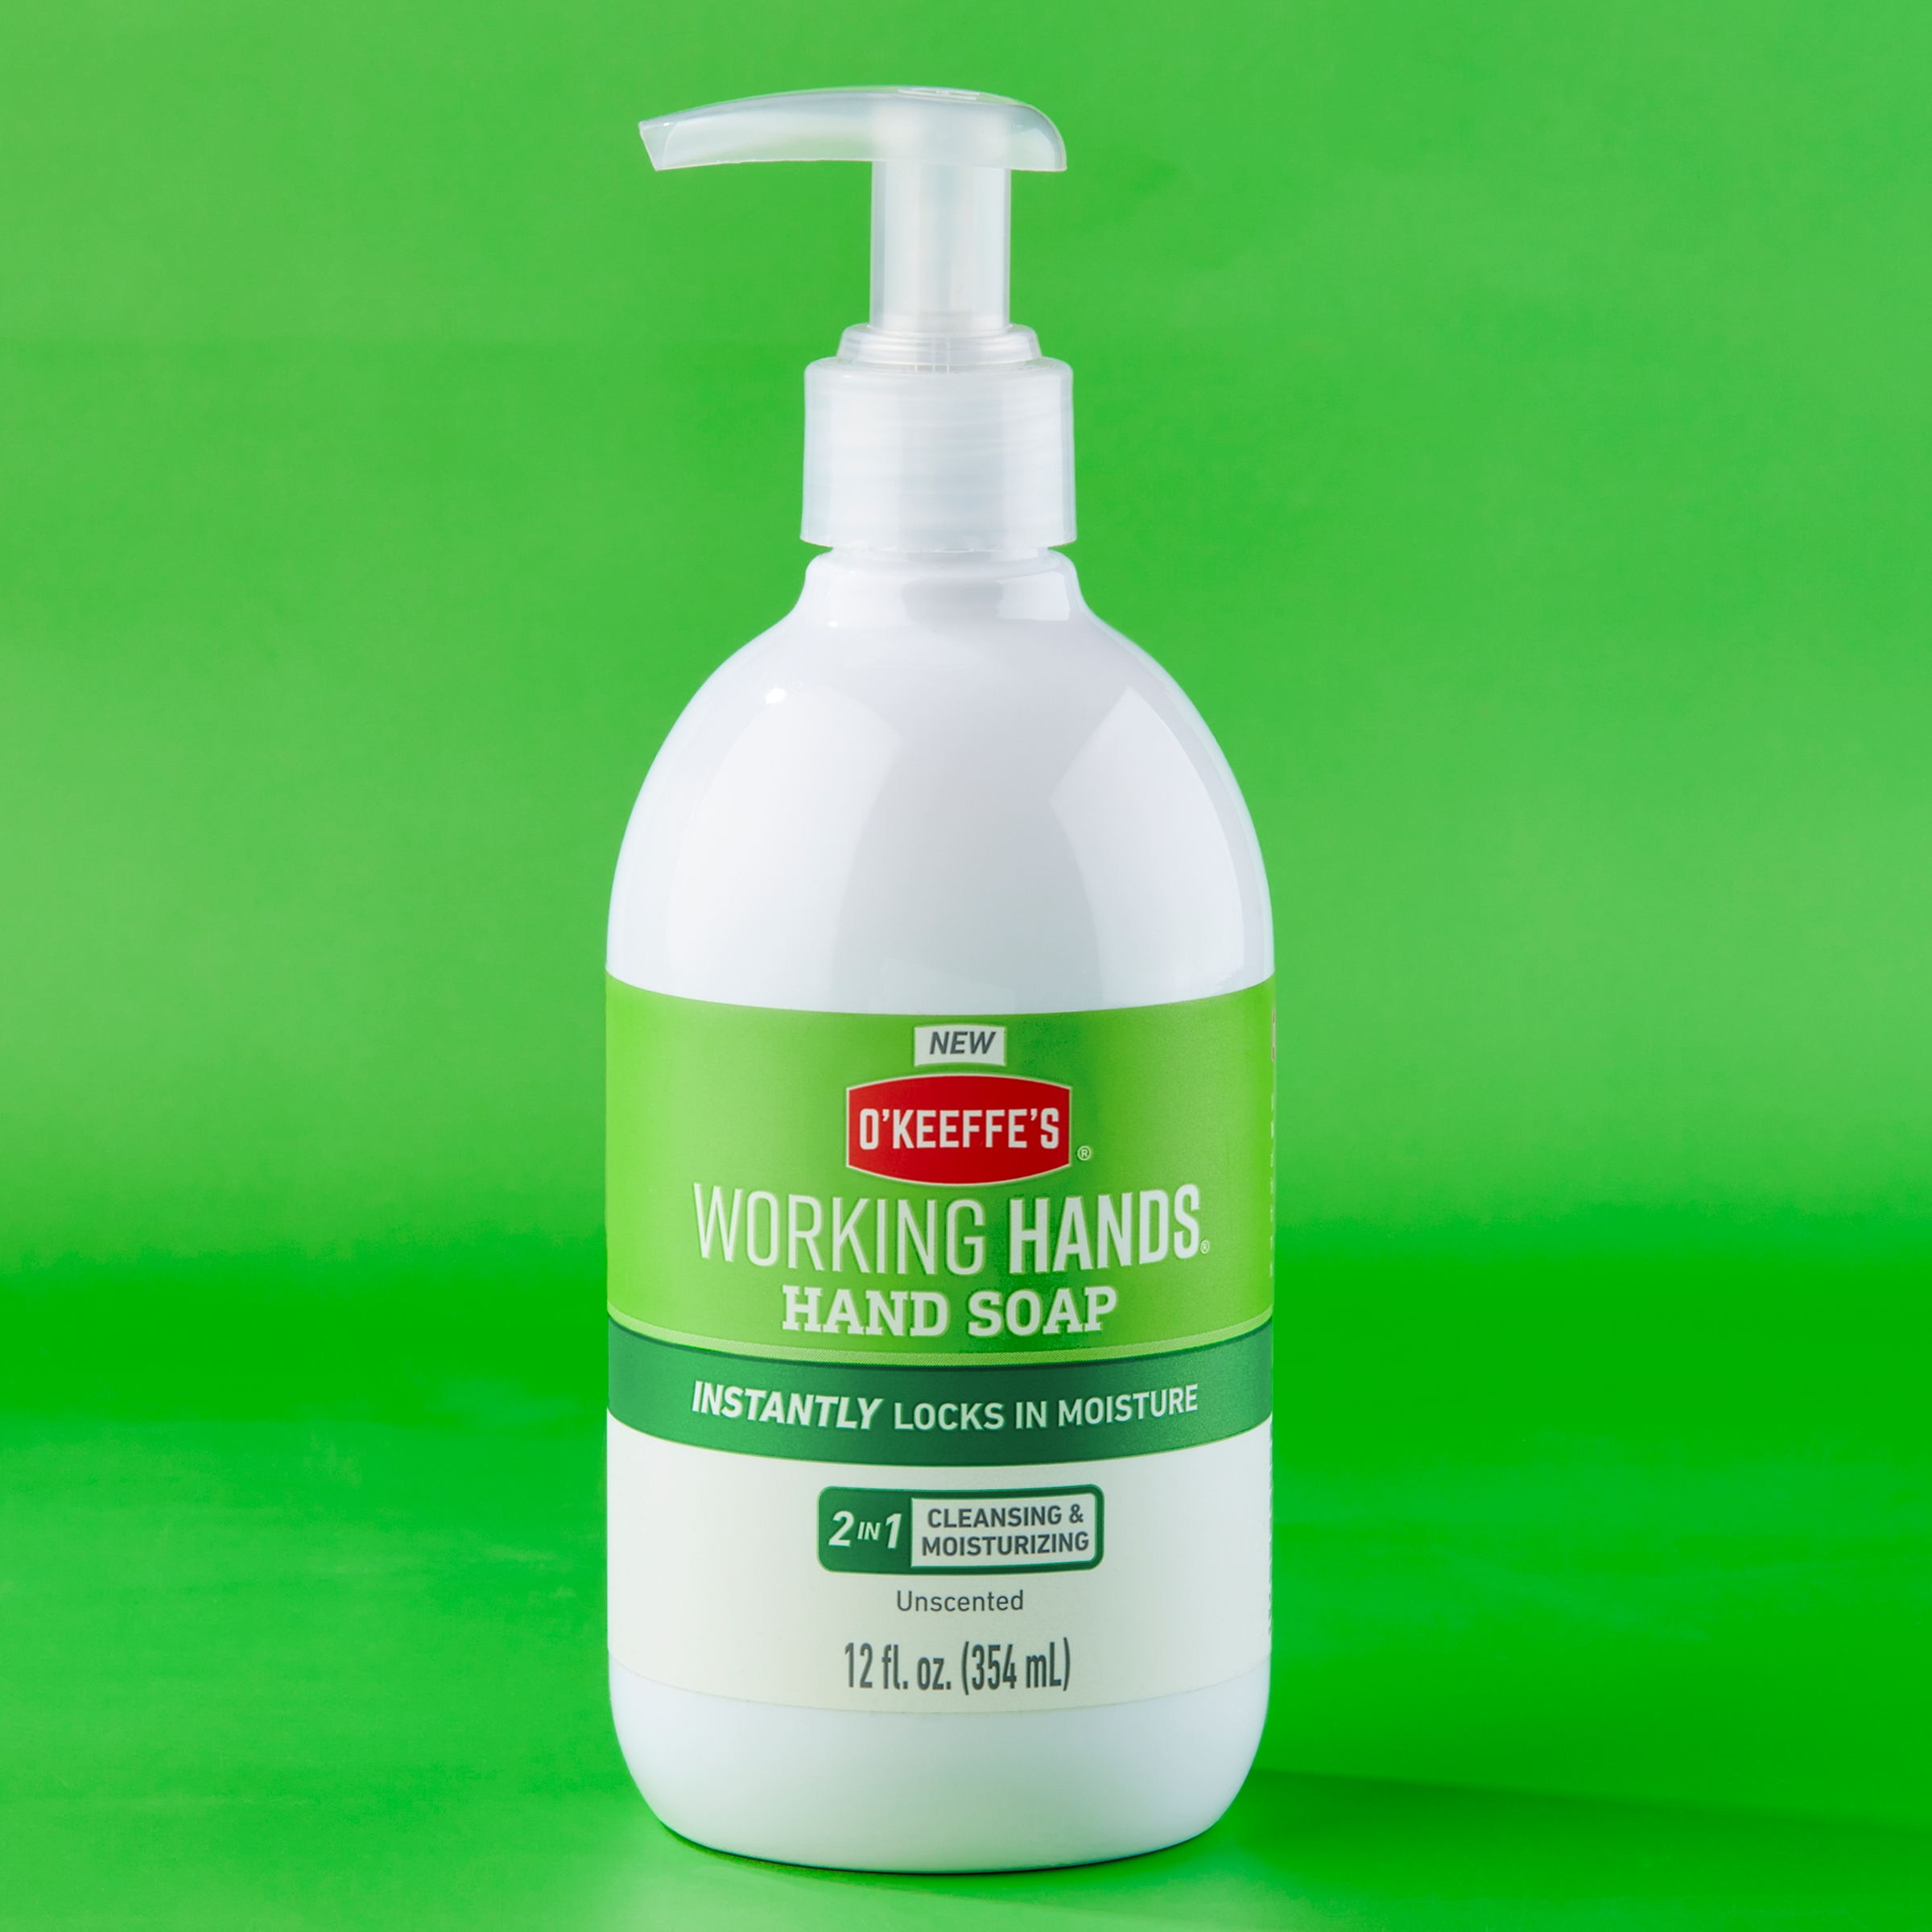 O'Keeffe's Working Hands Moisturizing Liquid Hand Soap, Unscented, 12 fl oz (354 ml) - image 2 of 13